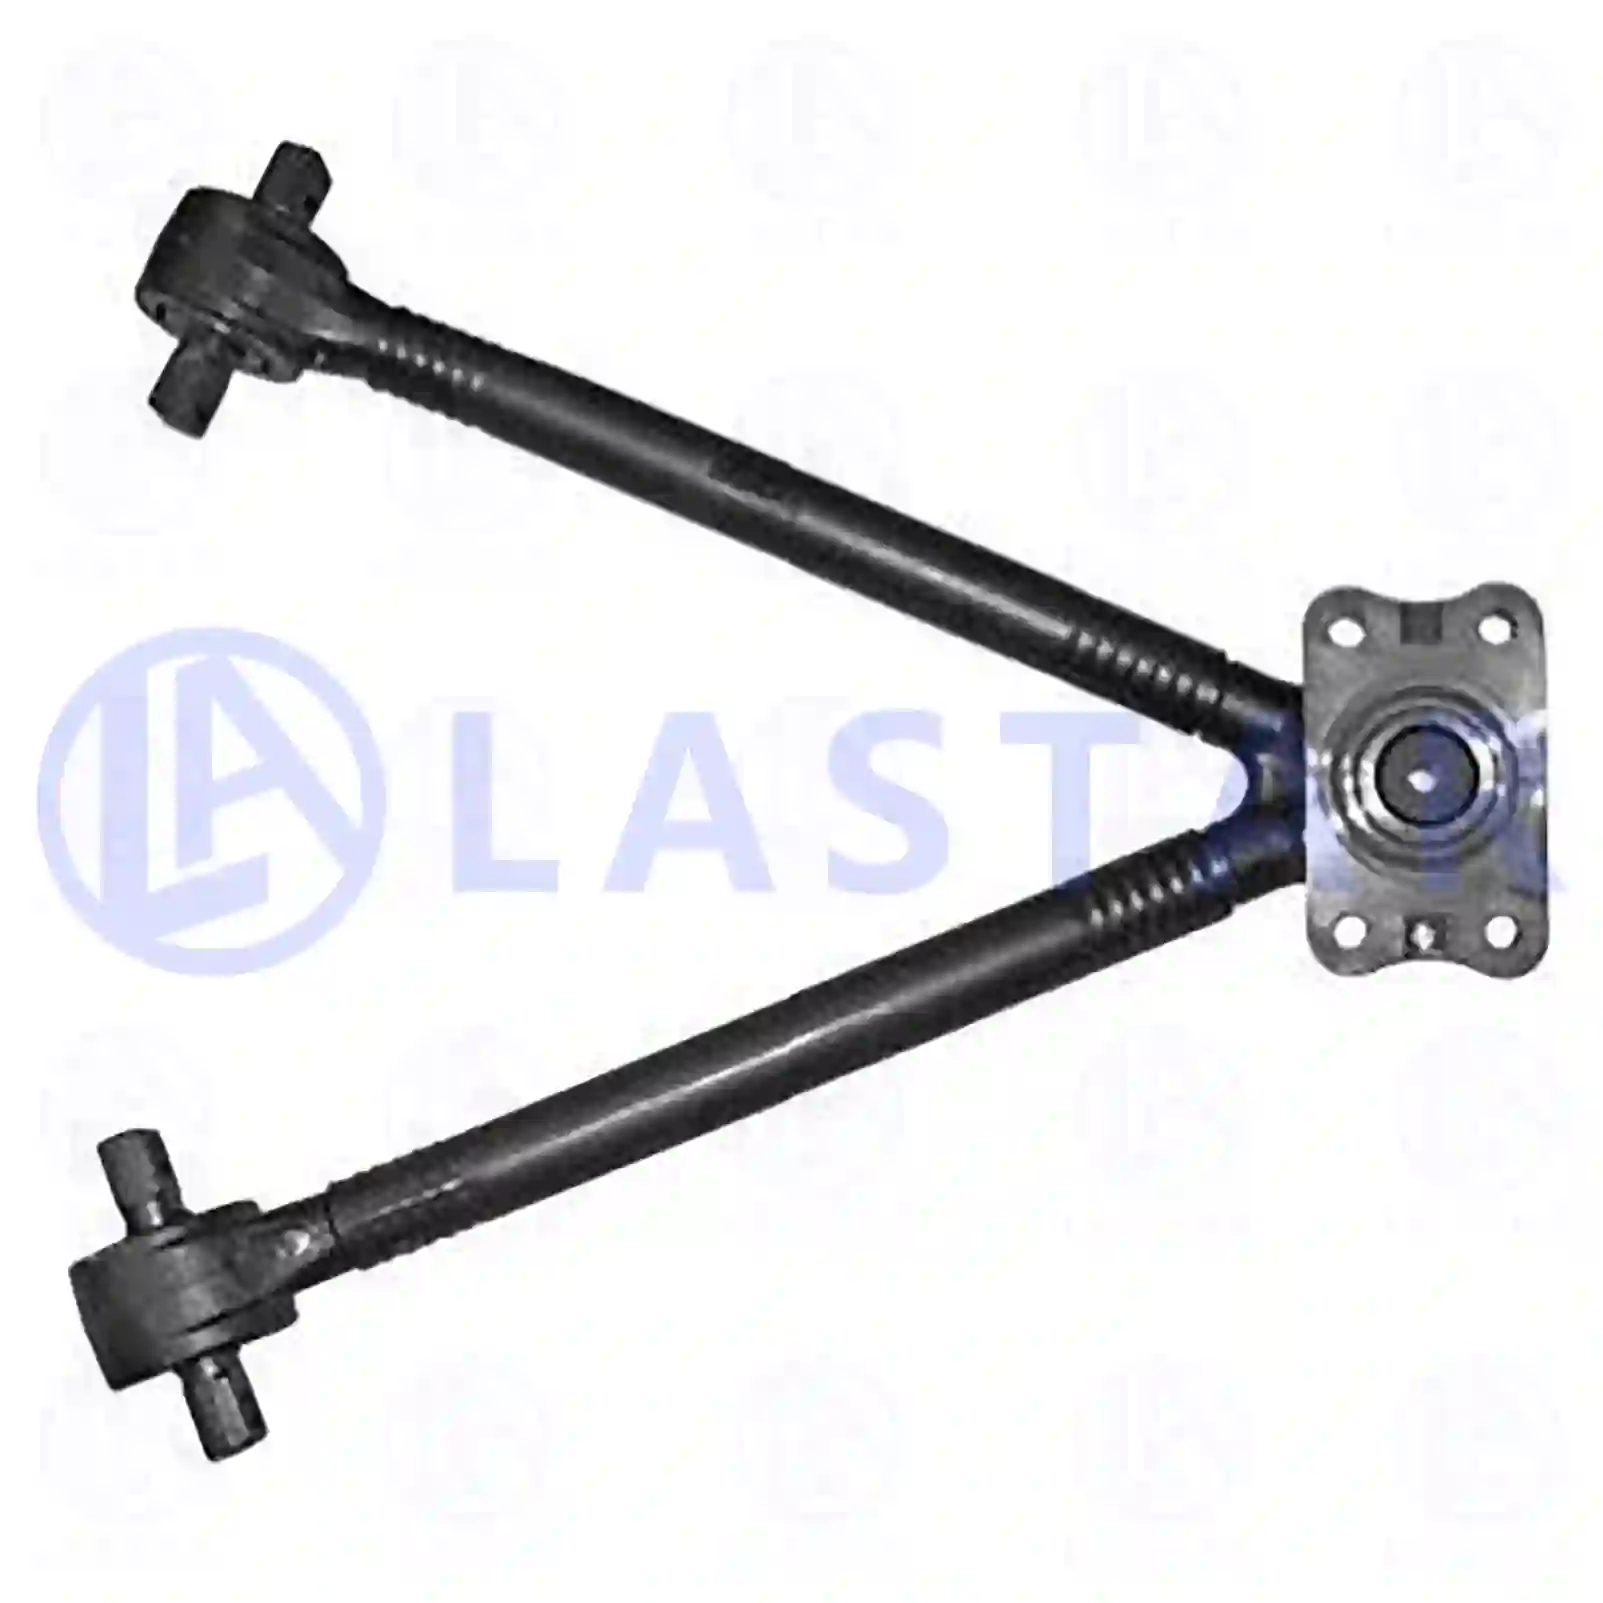 V-stay, 77729412, 41296730, 41296731, ||  77729412 Lastar Spare Part | Truck Spare Parts, Auotomotive Spare Parts V-stay, 77729412, 41296730, 41296731, ||  77729412 Lastar Spare Part | Truck Spare Parts, Auotomotive Spare Parts